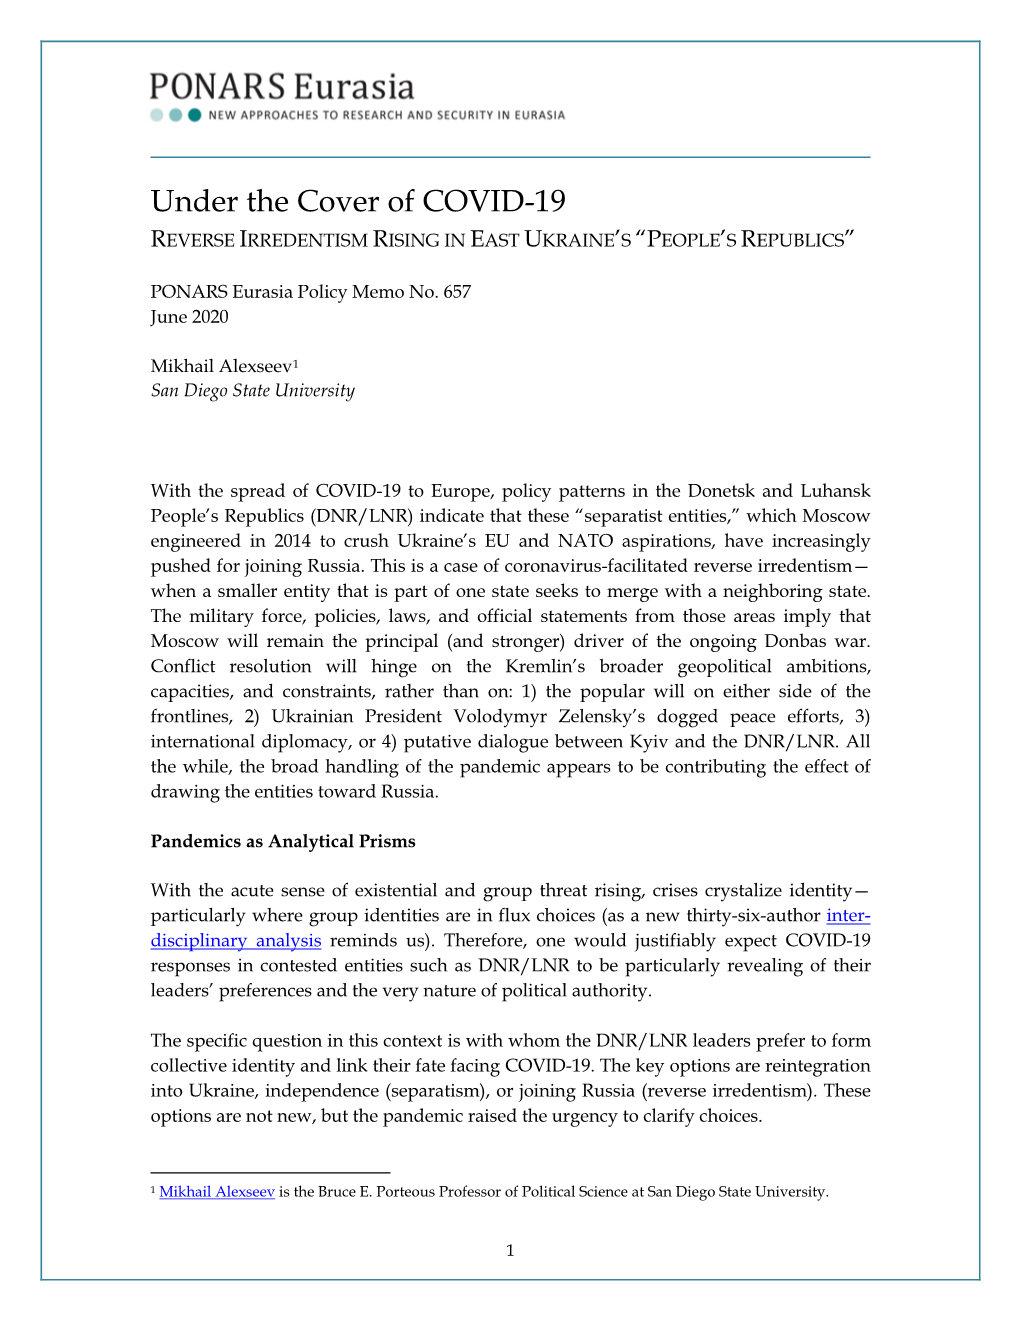 Under the Cover of COVID-19 REVERSE IRREDENTISM RISING in EAST UKRAINE’S “PEOPLE’S REPUBLICS”